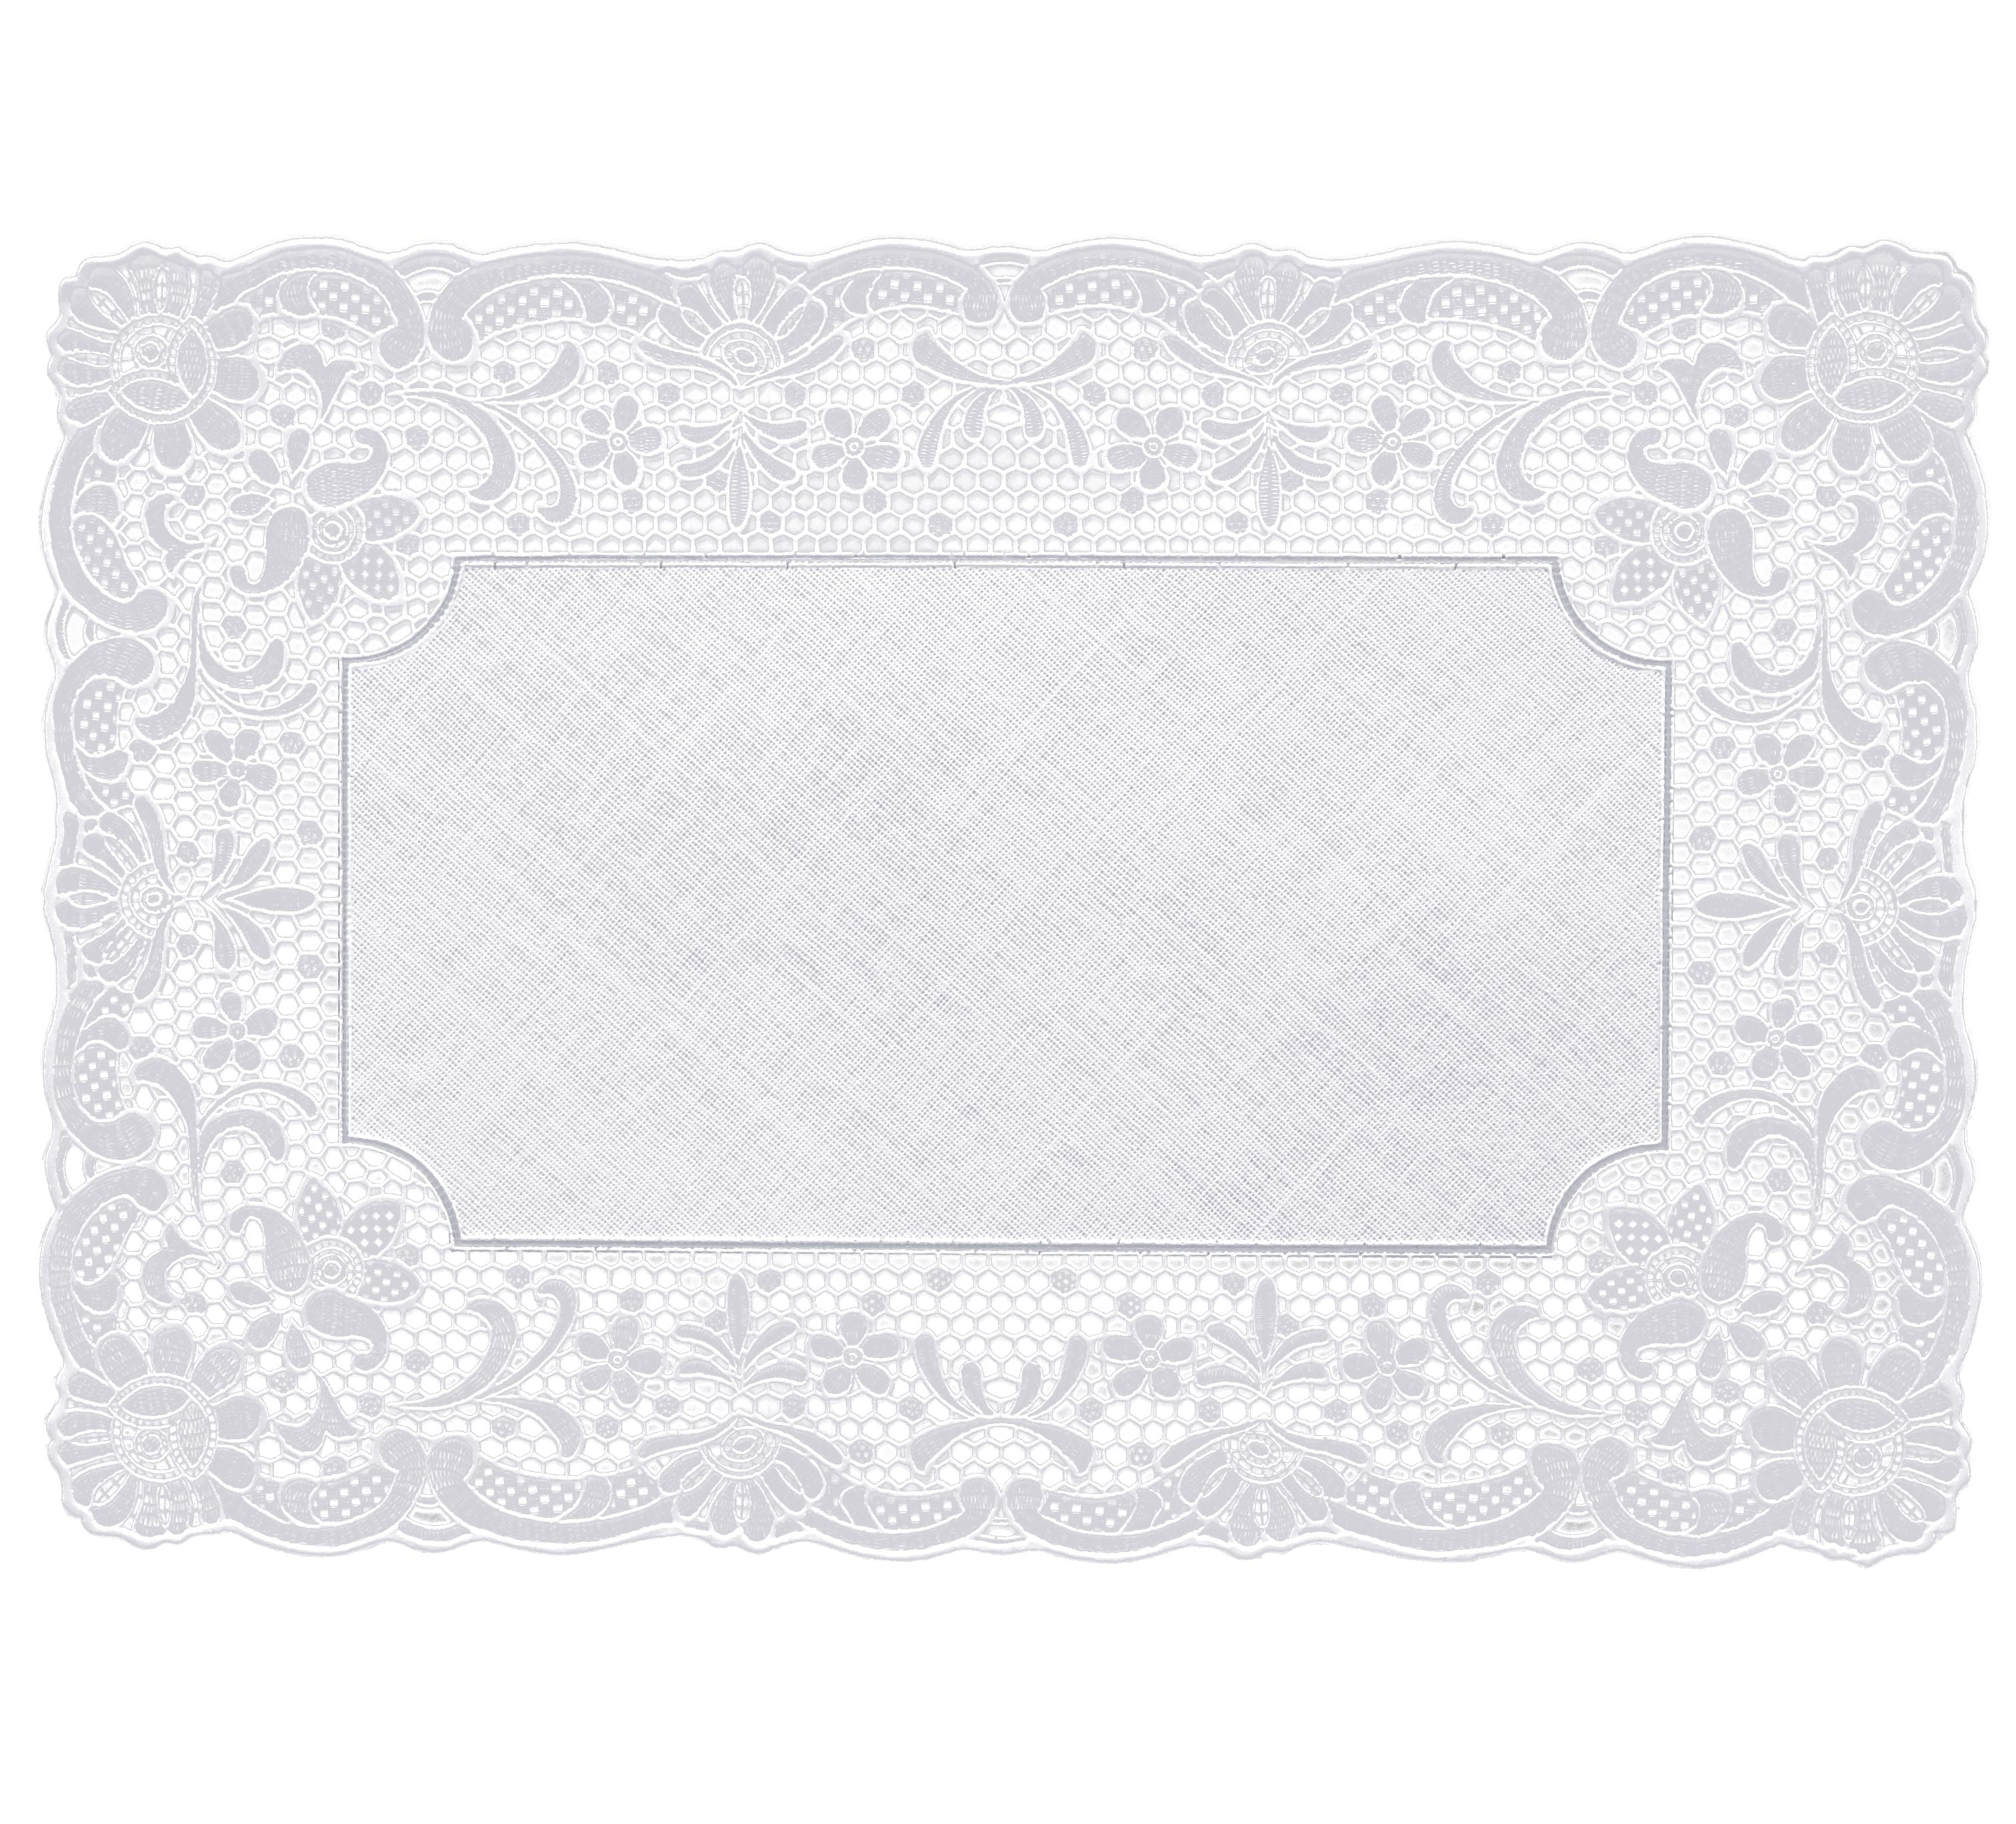 2 RECTANGLE EMBOSSED LACE FABRIC PLACEMATS WASHABLE TABLE MATS 3 FLORAL DESIGNS